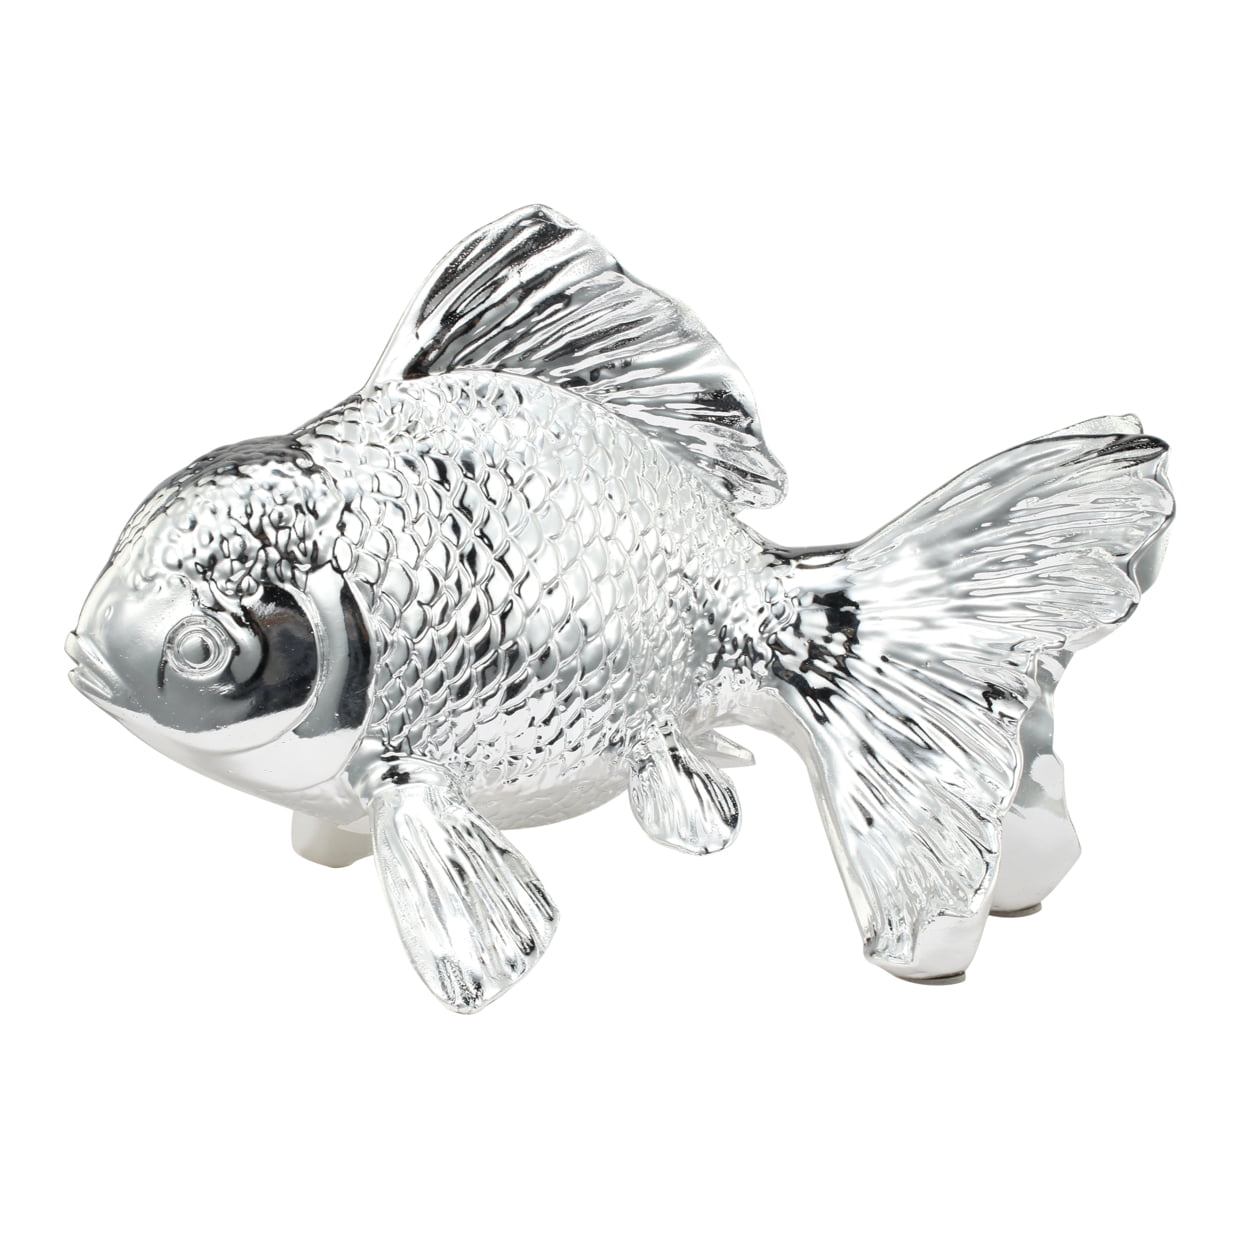 Picture of Benjara BM284981 10 in. Don Goldfish Accent Figurine, Tabletop Decor - Chrome Finished Resin